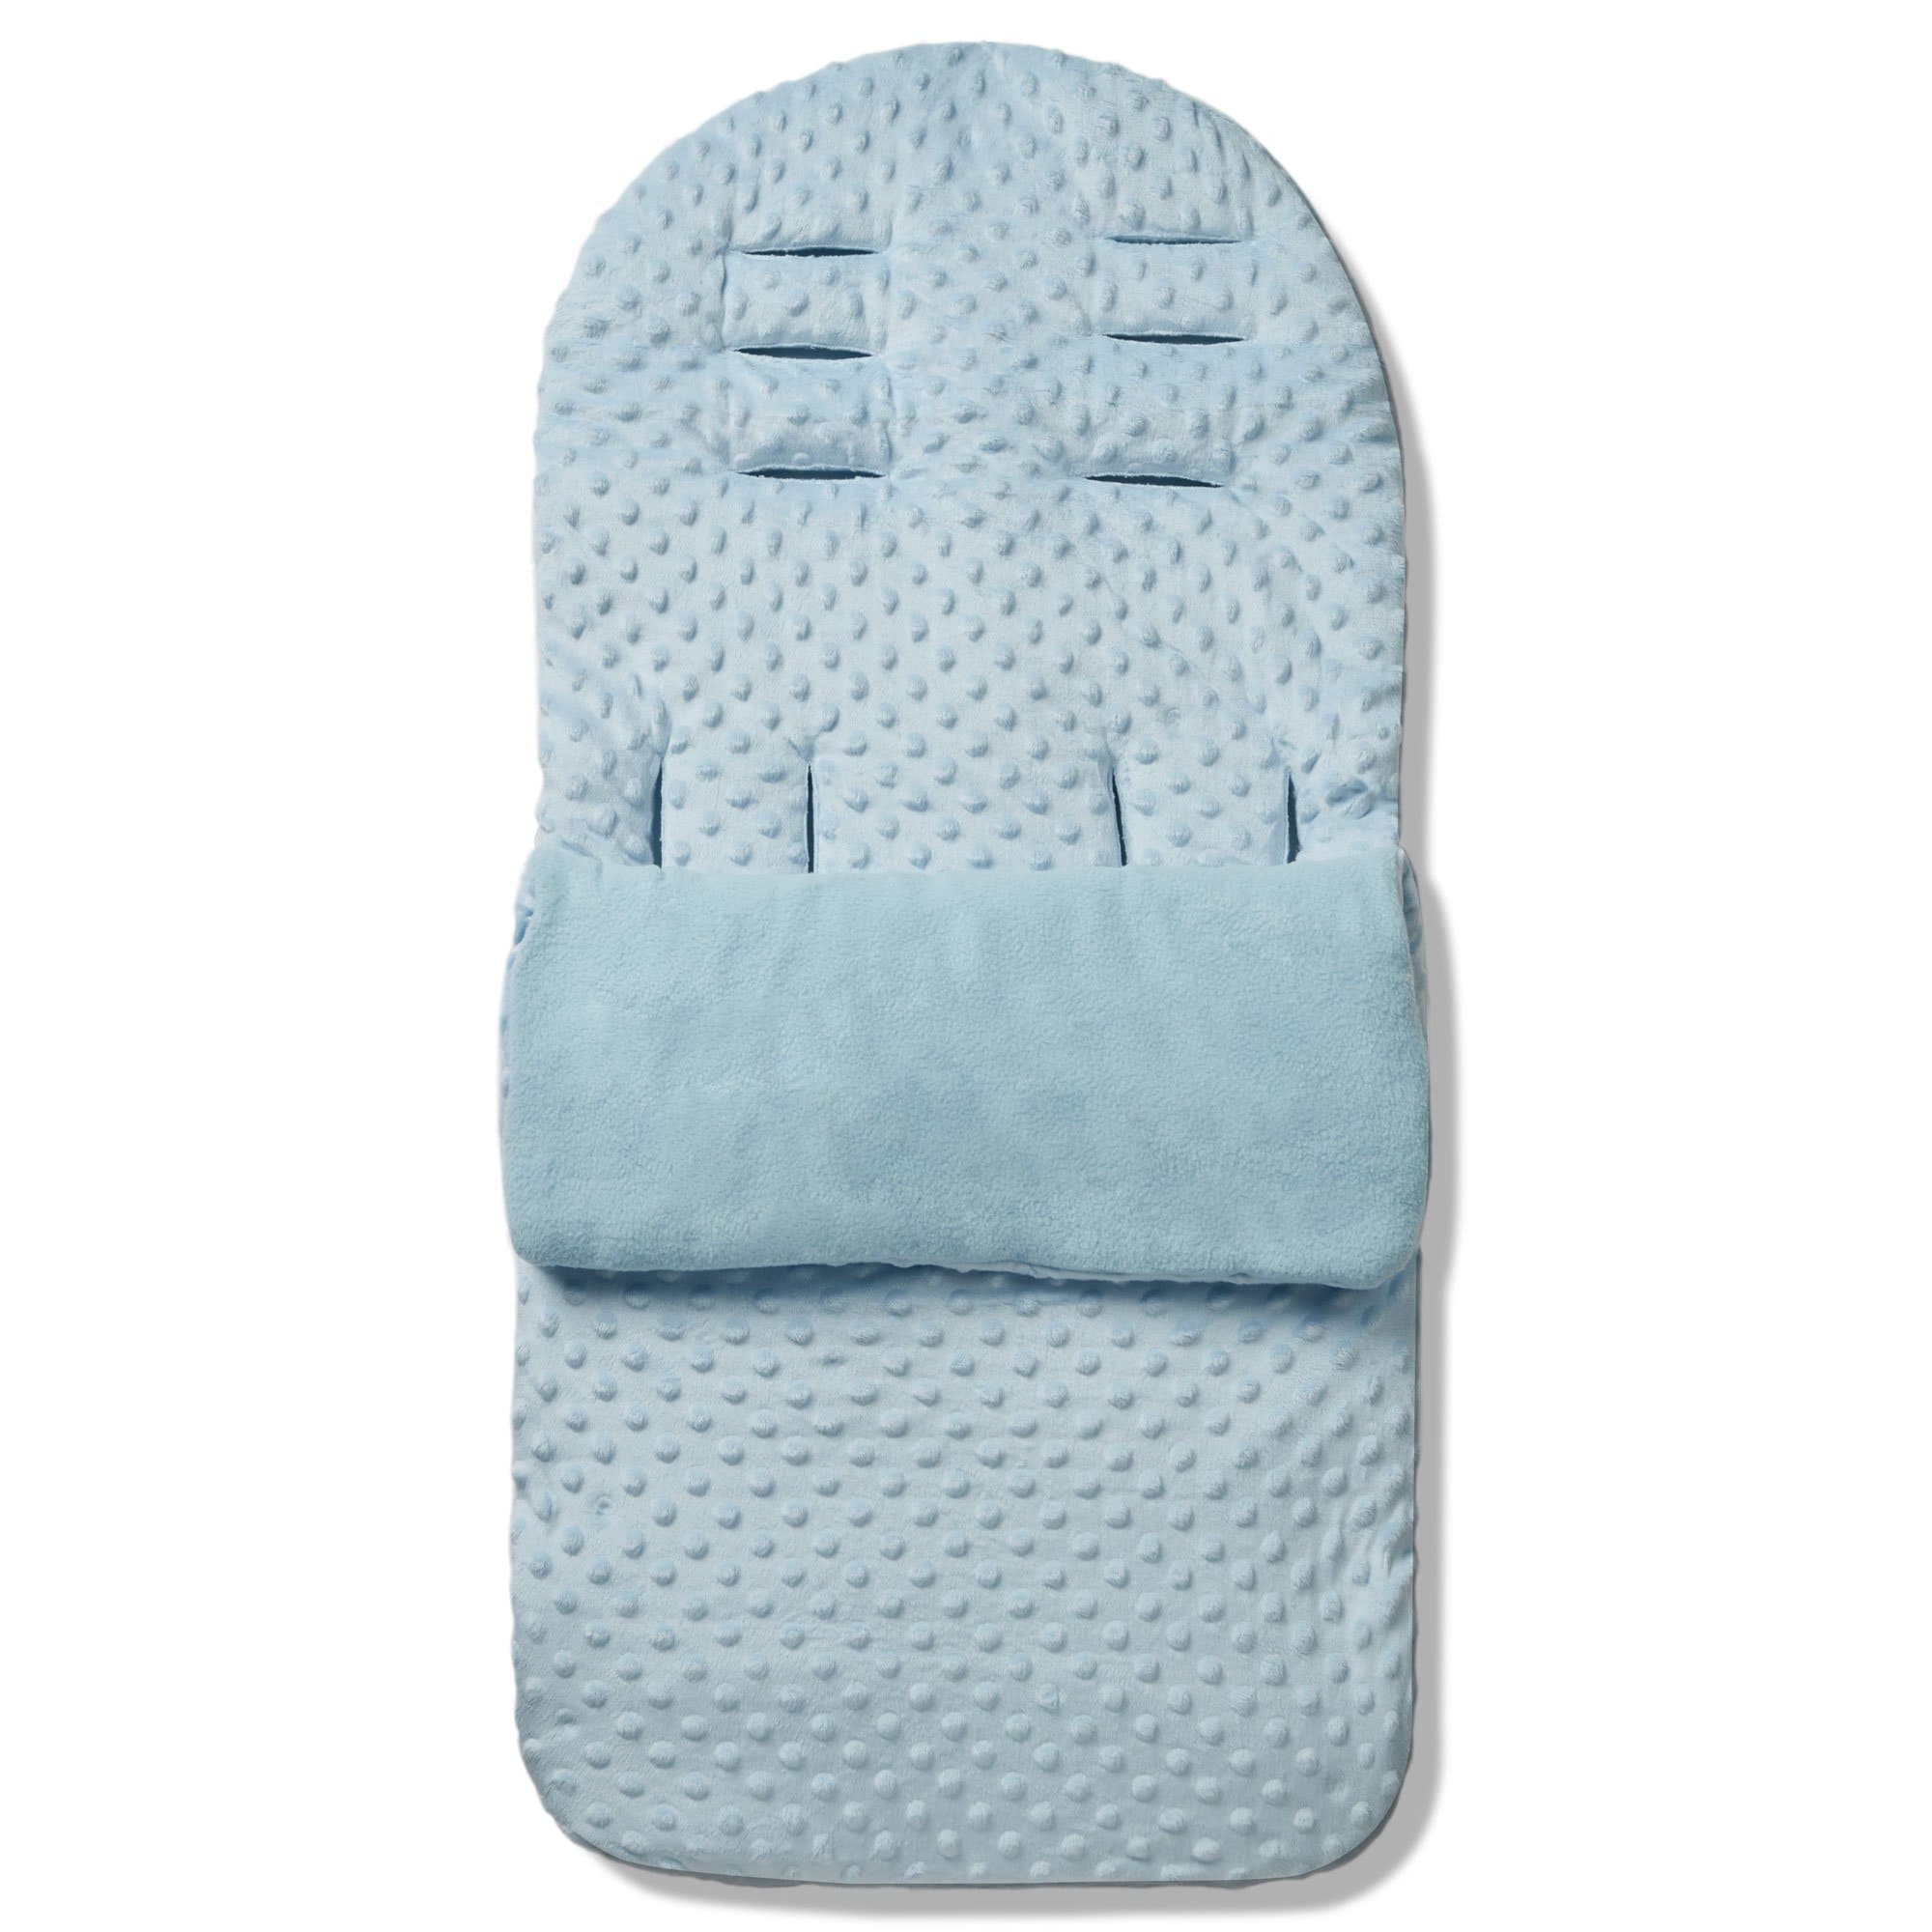 Dimple Footmuff / Cosy Toes Compatible with TFK - Blue / Fits All Models | For Your Little One